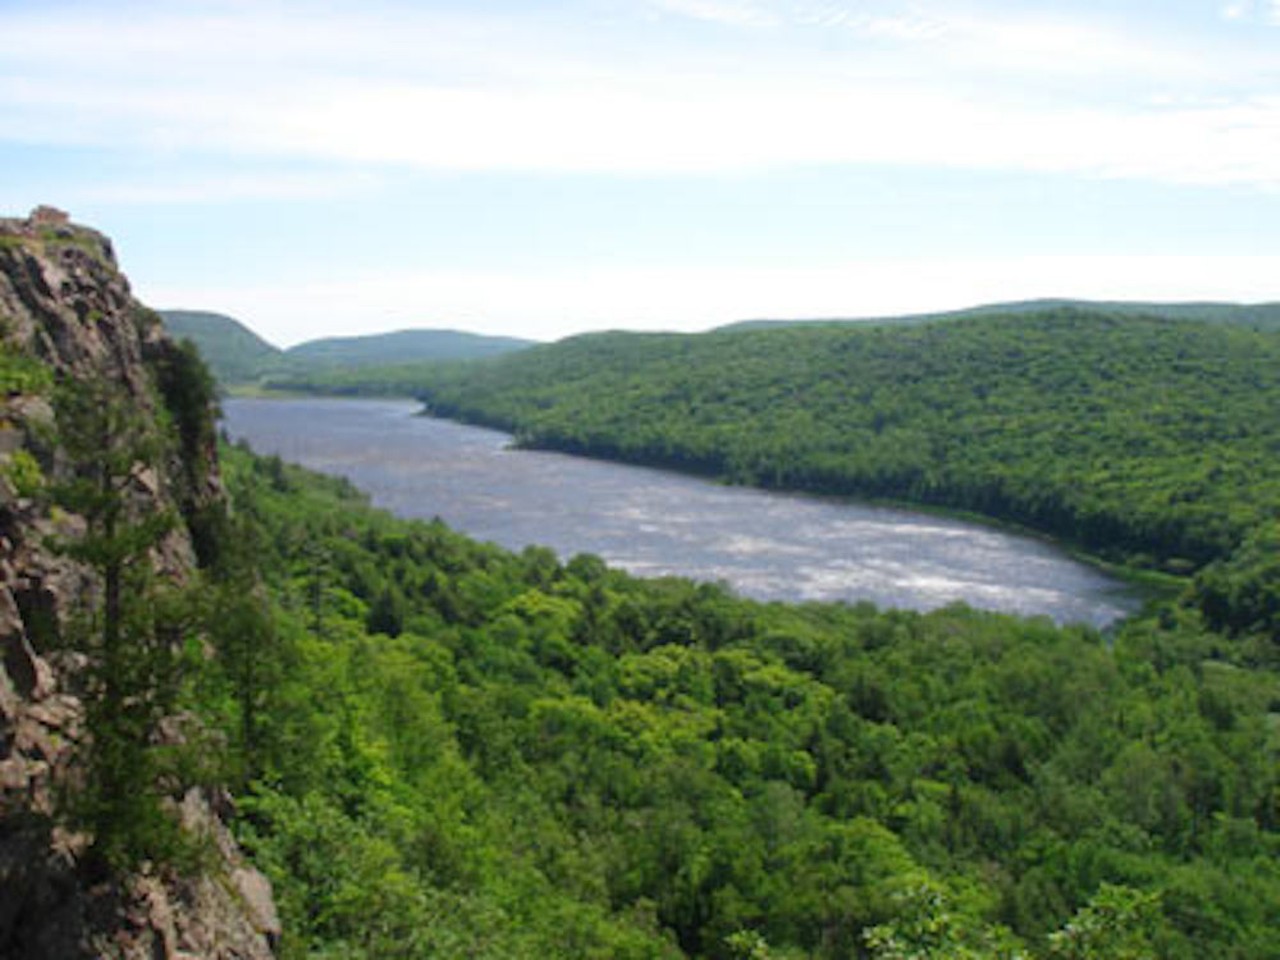 Lake of the Clouds, Porcupine Mountains |  Amidst the Porcupine Mountains lies the Lake of the Clouds, which can be viewed from a boardwalk lookout. Photo: Joe Kaufman